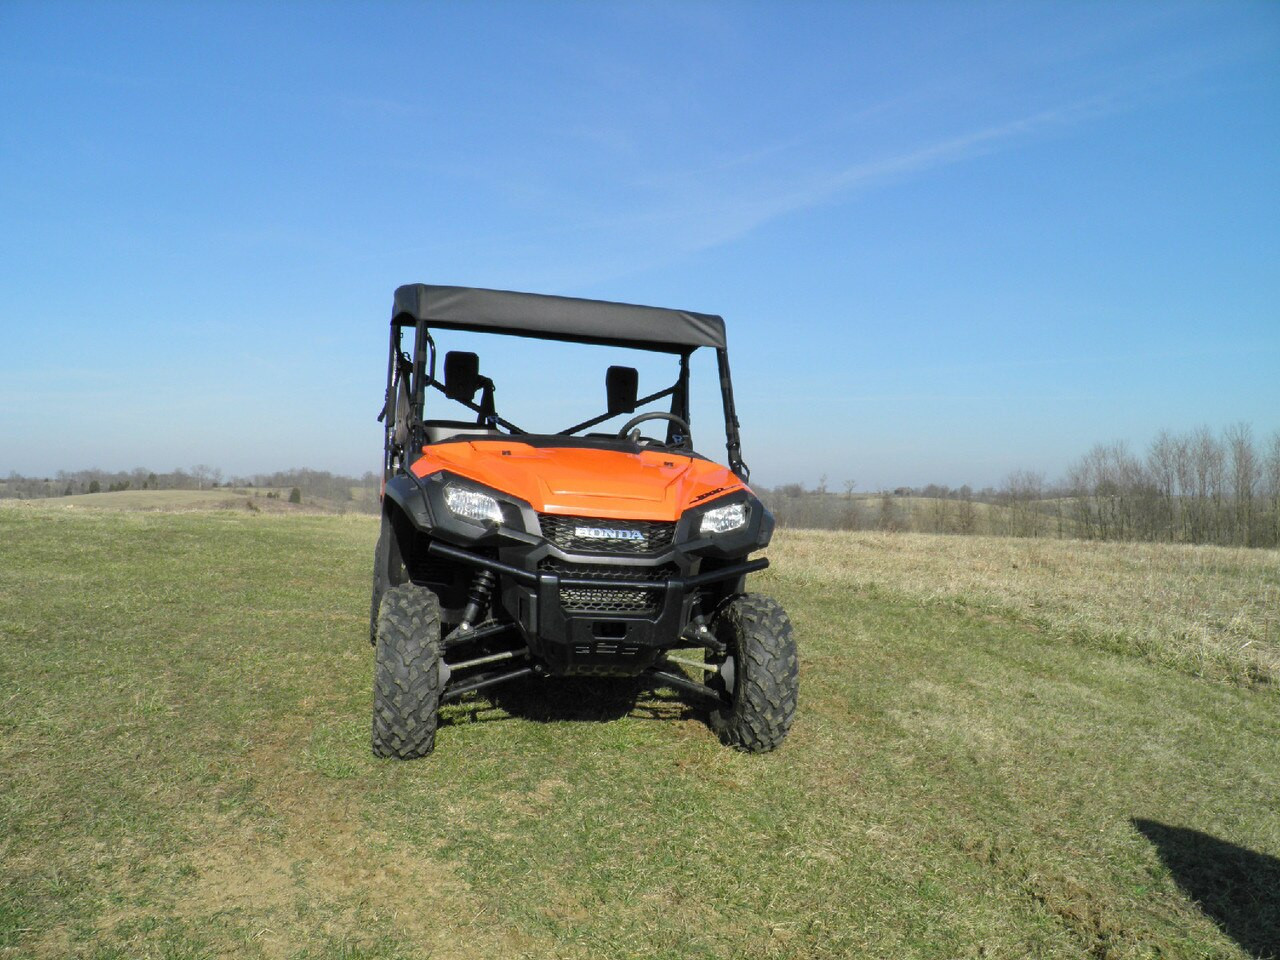 Honda Pioneer 1000 Soft Top front view distance